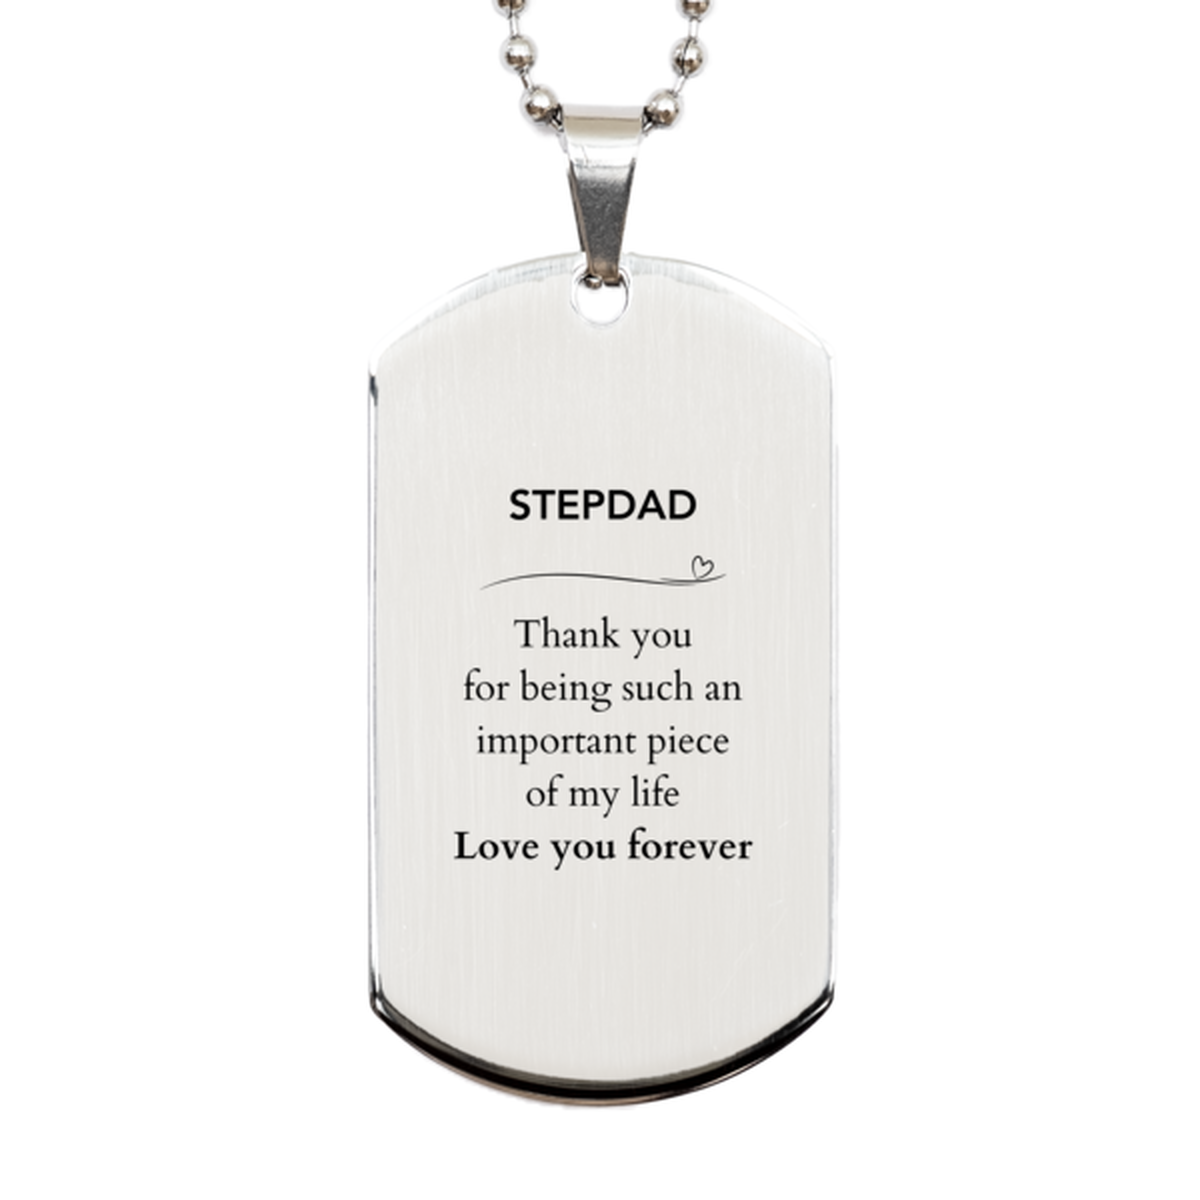 Appropriate Stepdad Silver Dog Tag Epic Birthday Gifts for Stepdad Thank you for being such an important piece of my life Stepdad Christmas Mothers Fathers Day